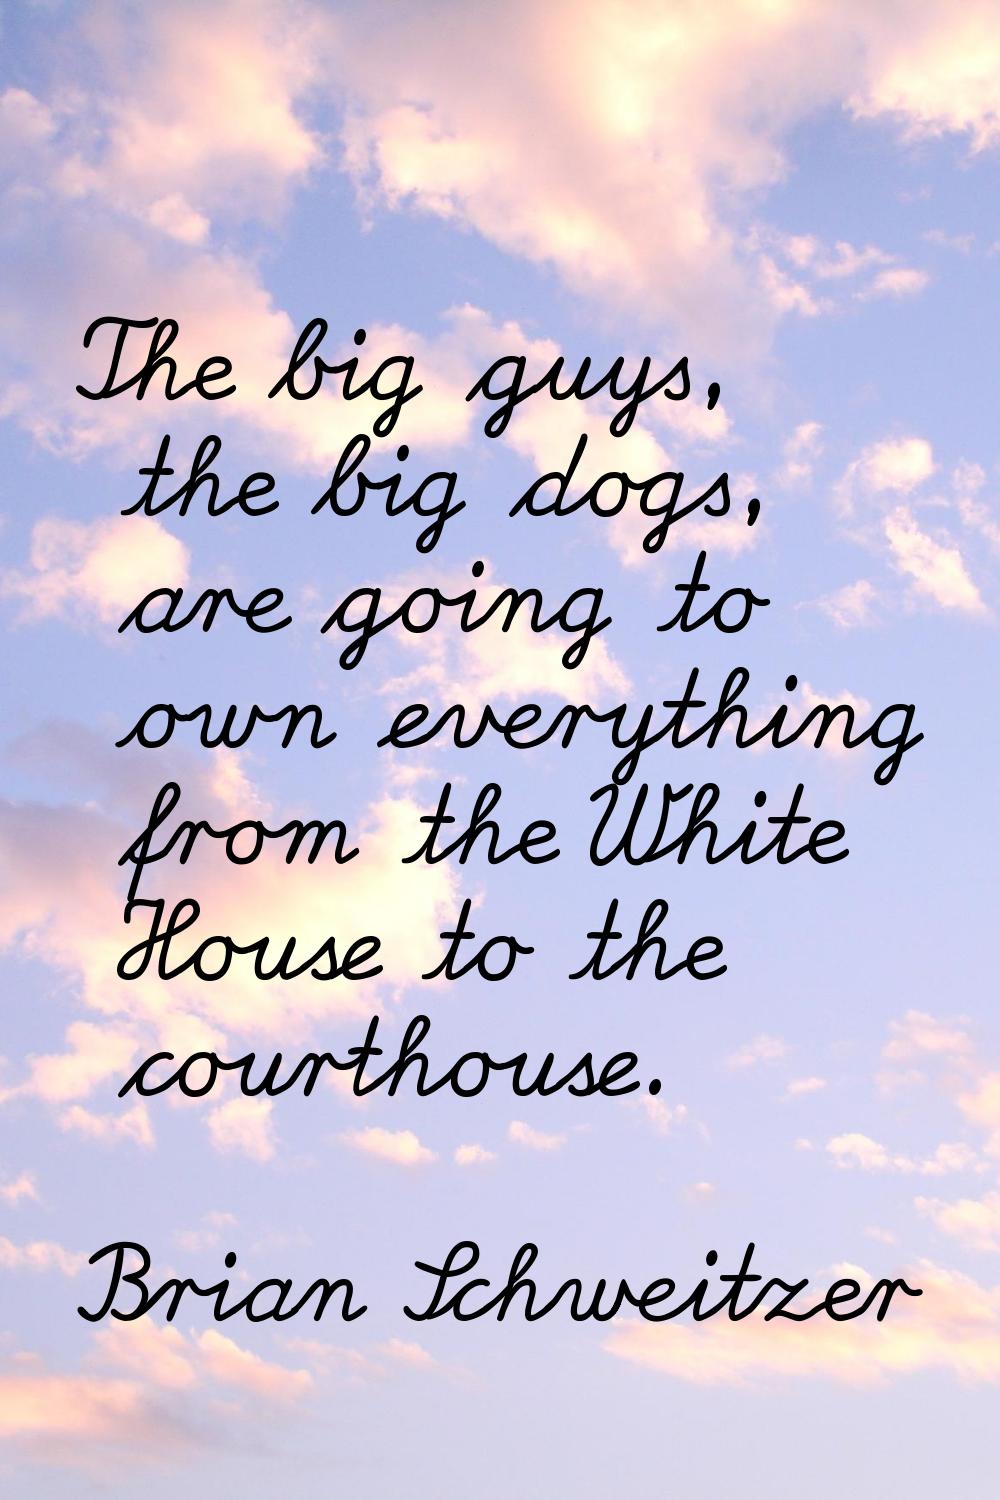 The big guys, the big dogs, are going to own everything from the White House to the courthouse.